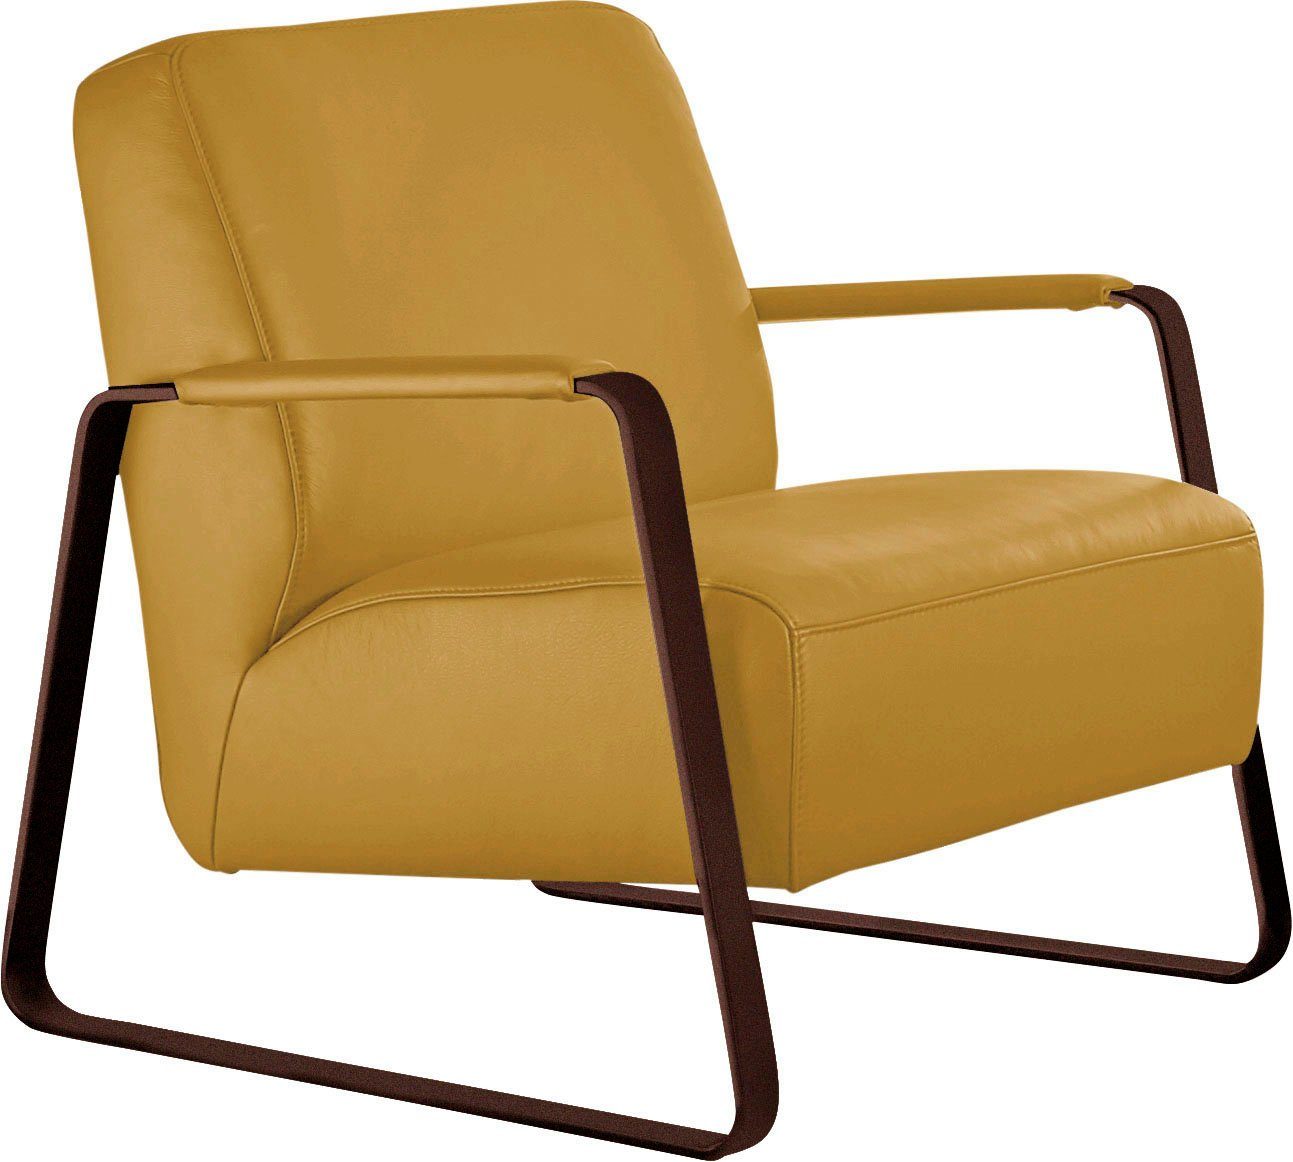 W.SCHILLIG Cocktailsessel quadroo, LIMITED EDITION in Trendfarbe Kurkuma,  Gestell in Bronze